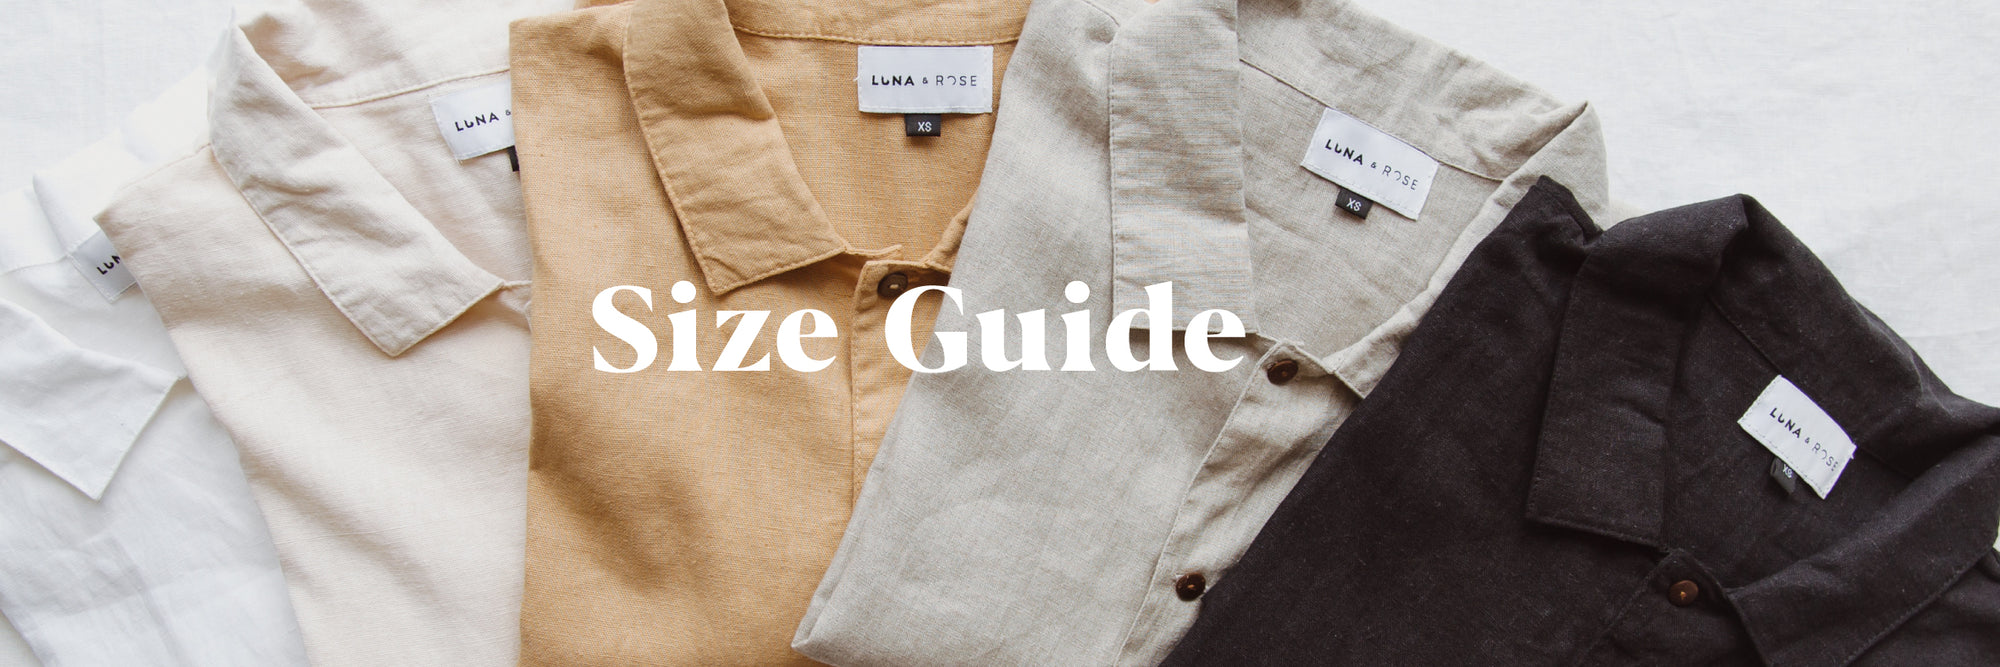 Luna & Rose Size Guide Apparel and Necklace lengths